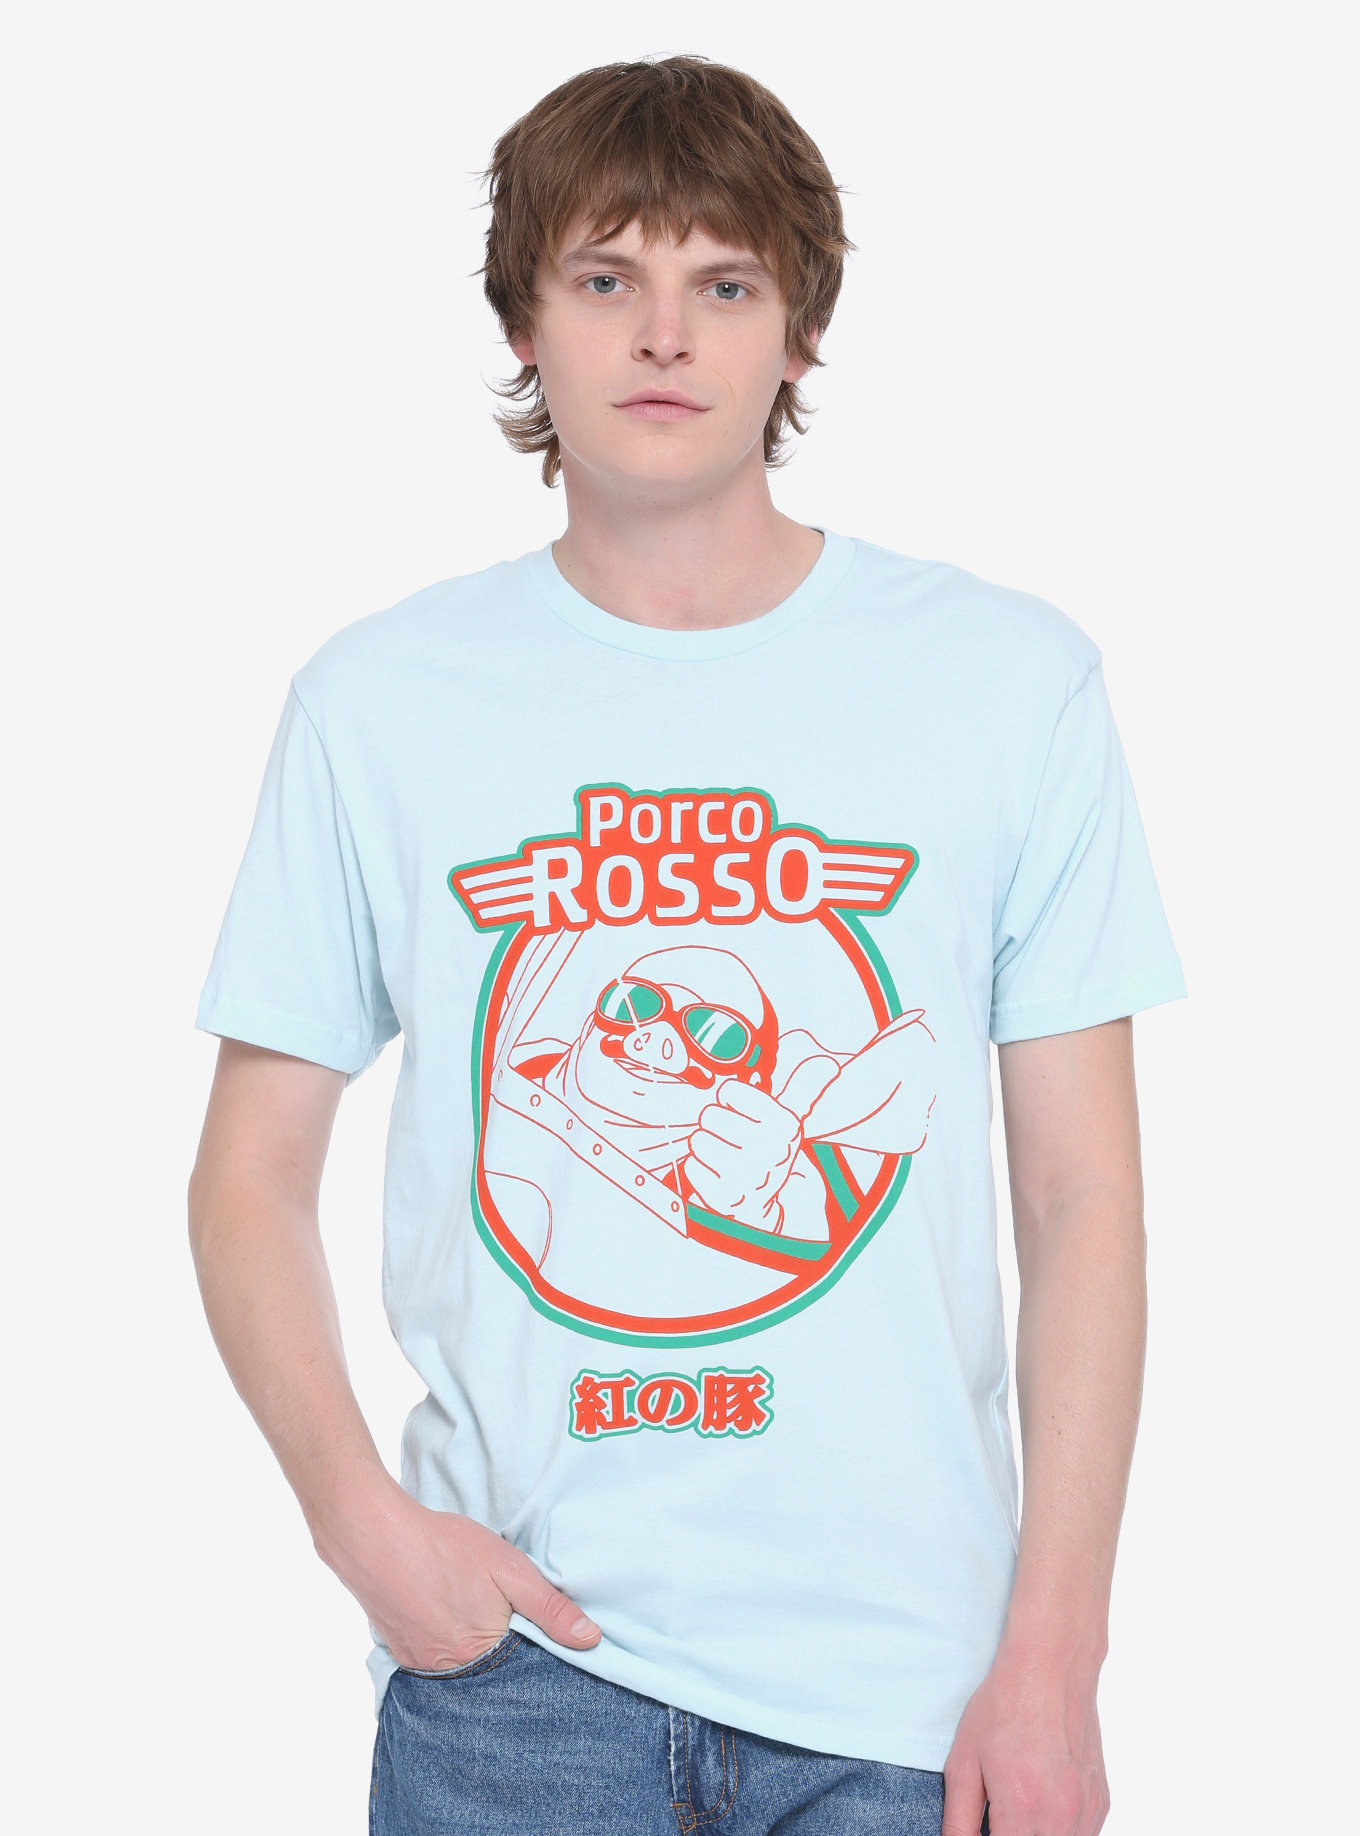 a model in a white t-shirt with porco rosso on it 